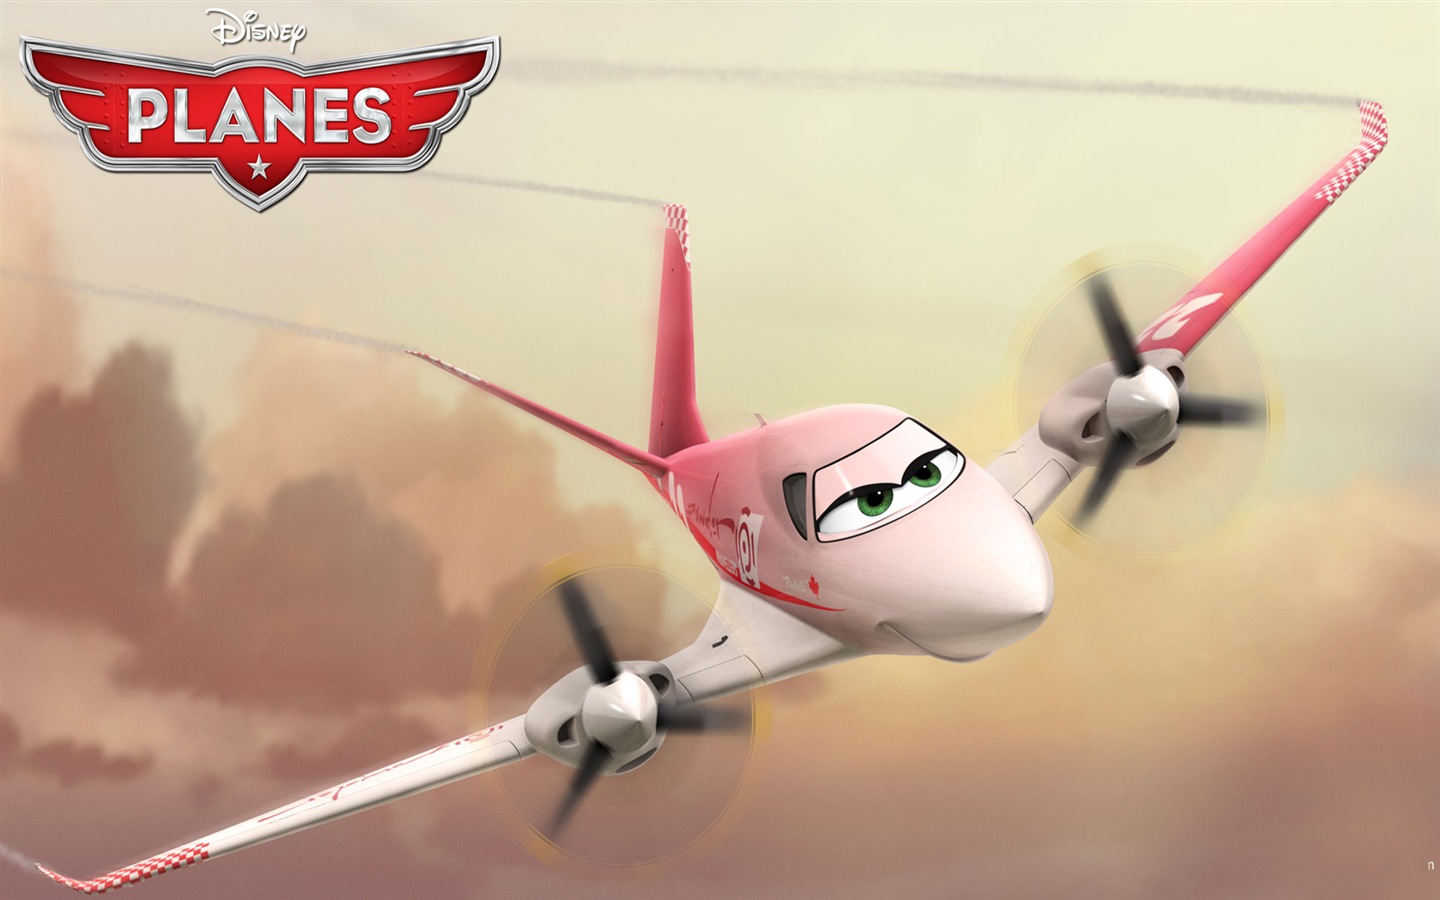 Planes 2013 HD wallpapers #12 - 1440x900